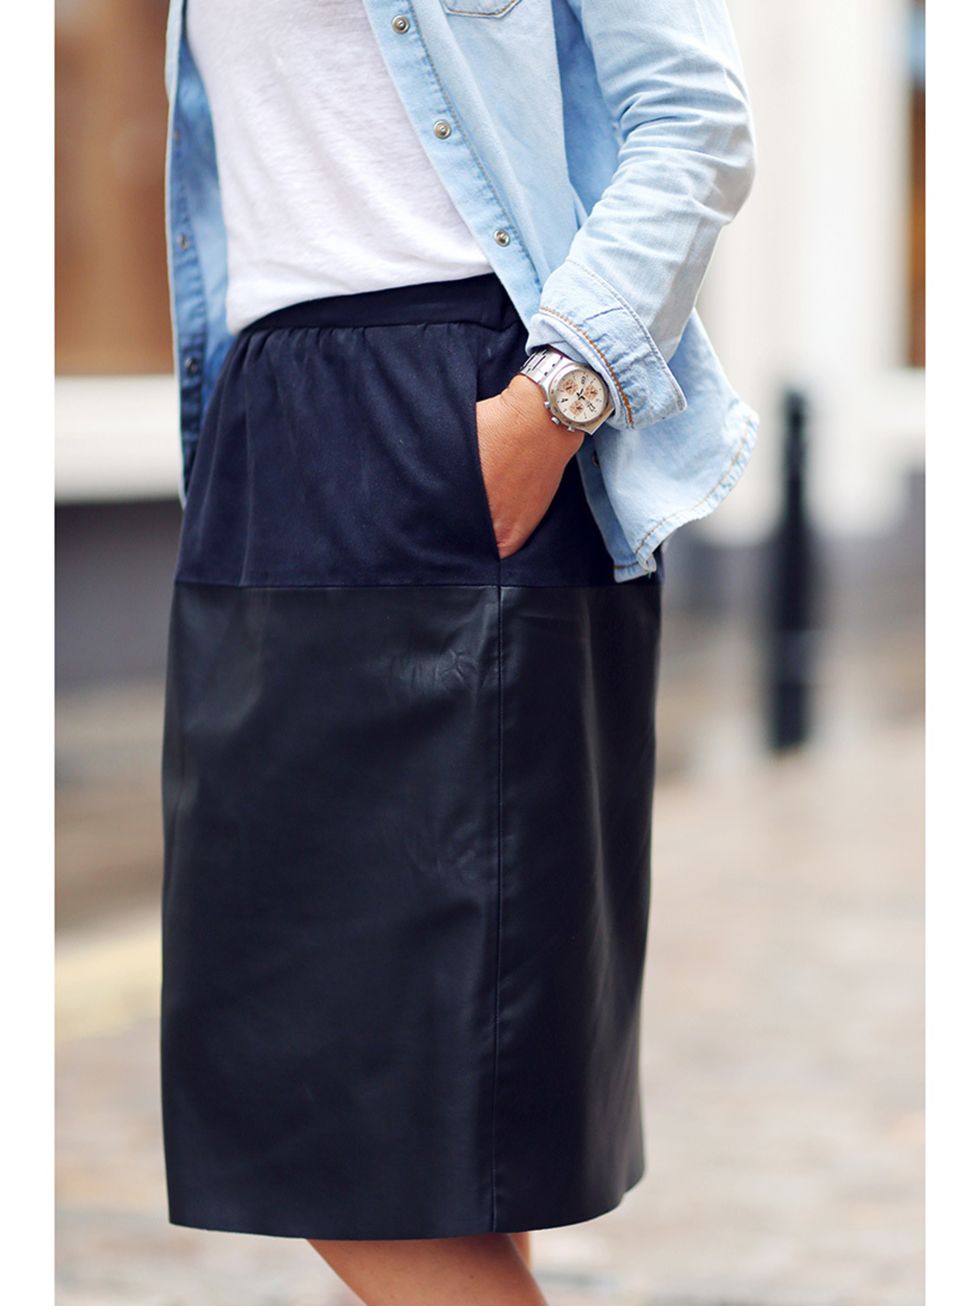 Kirsty Dale, Executive Fashion Director
Topshop shirt, Massimo Dutti top, Zara skirt, Whistles trainers, Swatch watch.